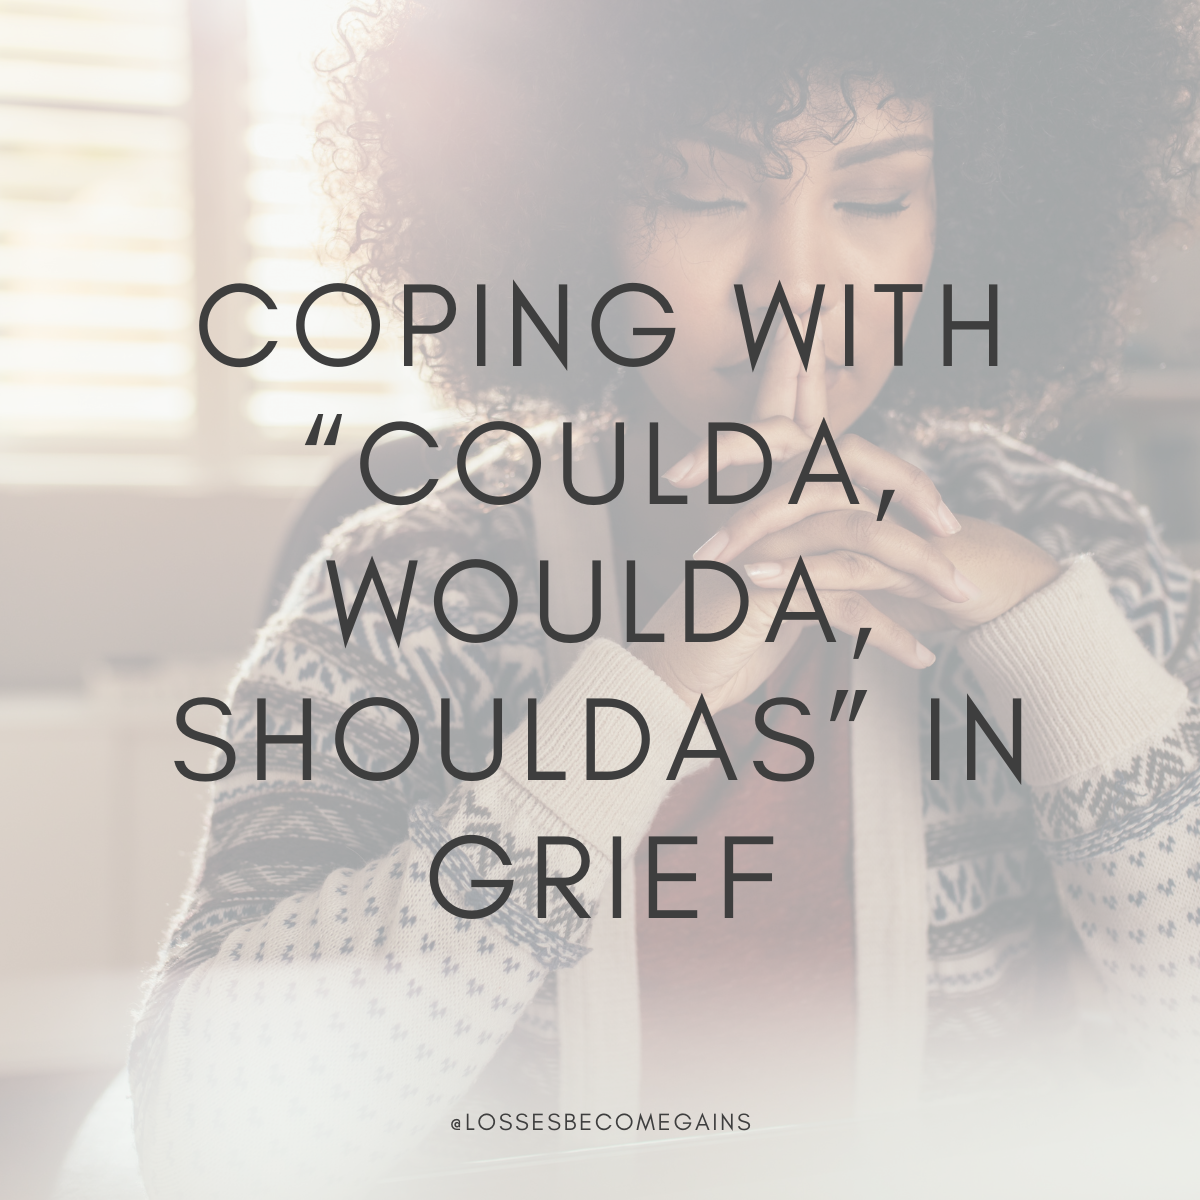 Coping with “Coulda, Woulda, Shouldas” in Grief by Losses Become Gains